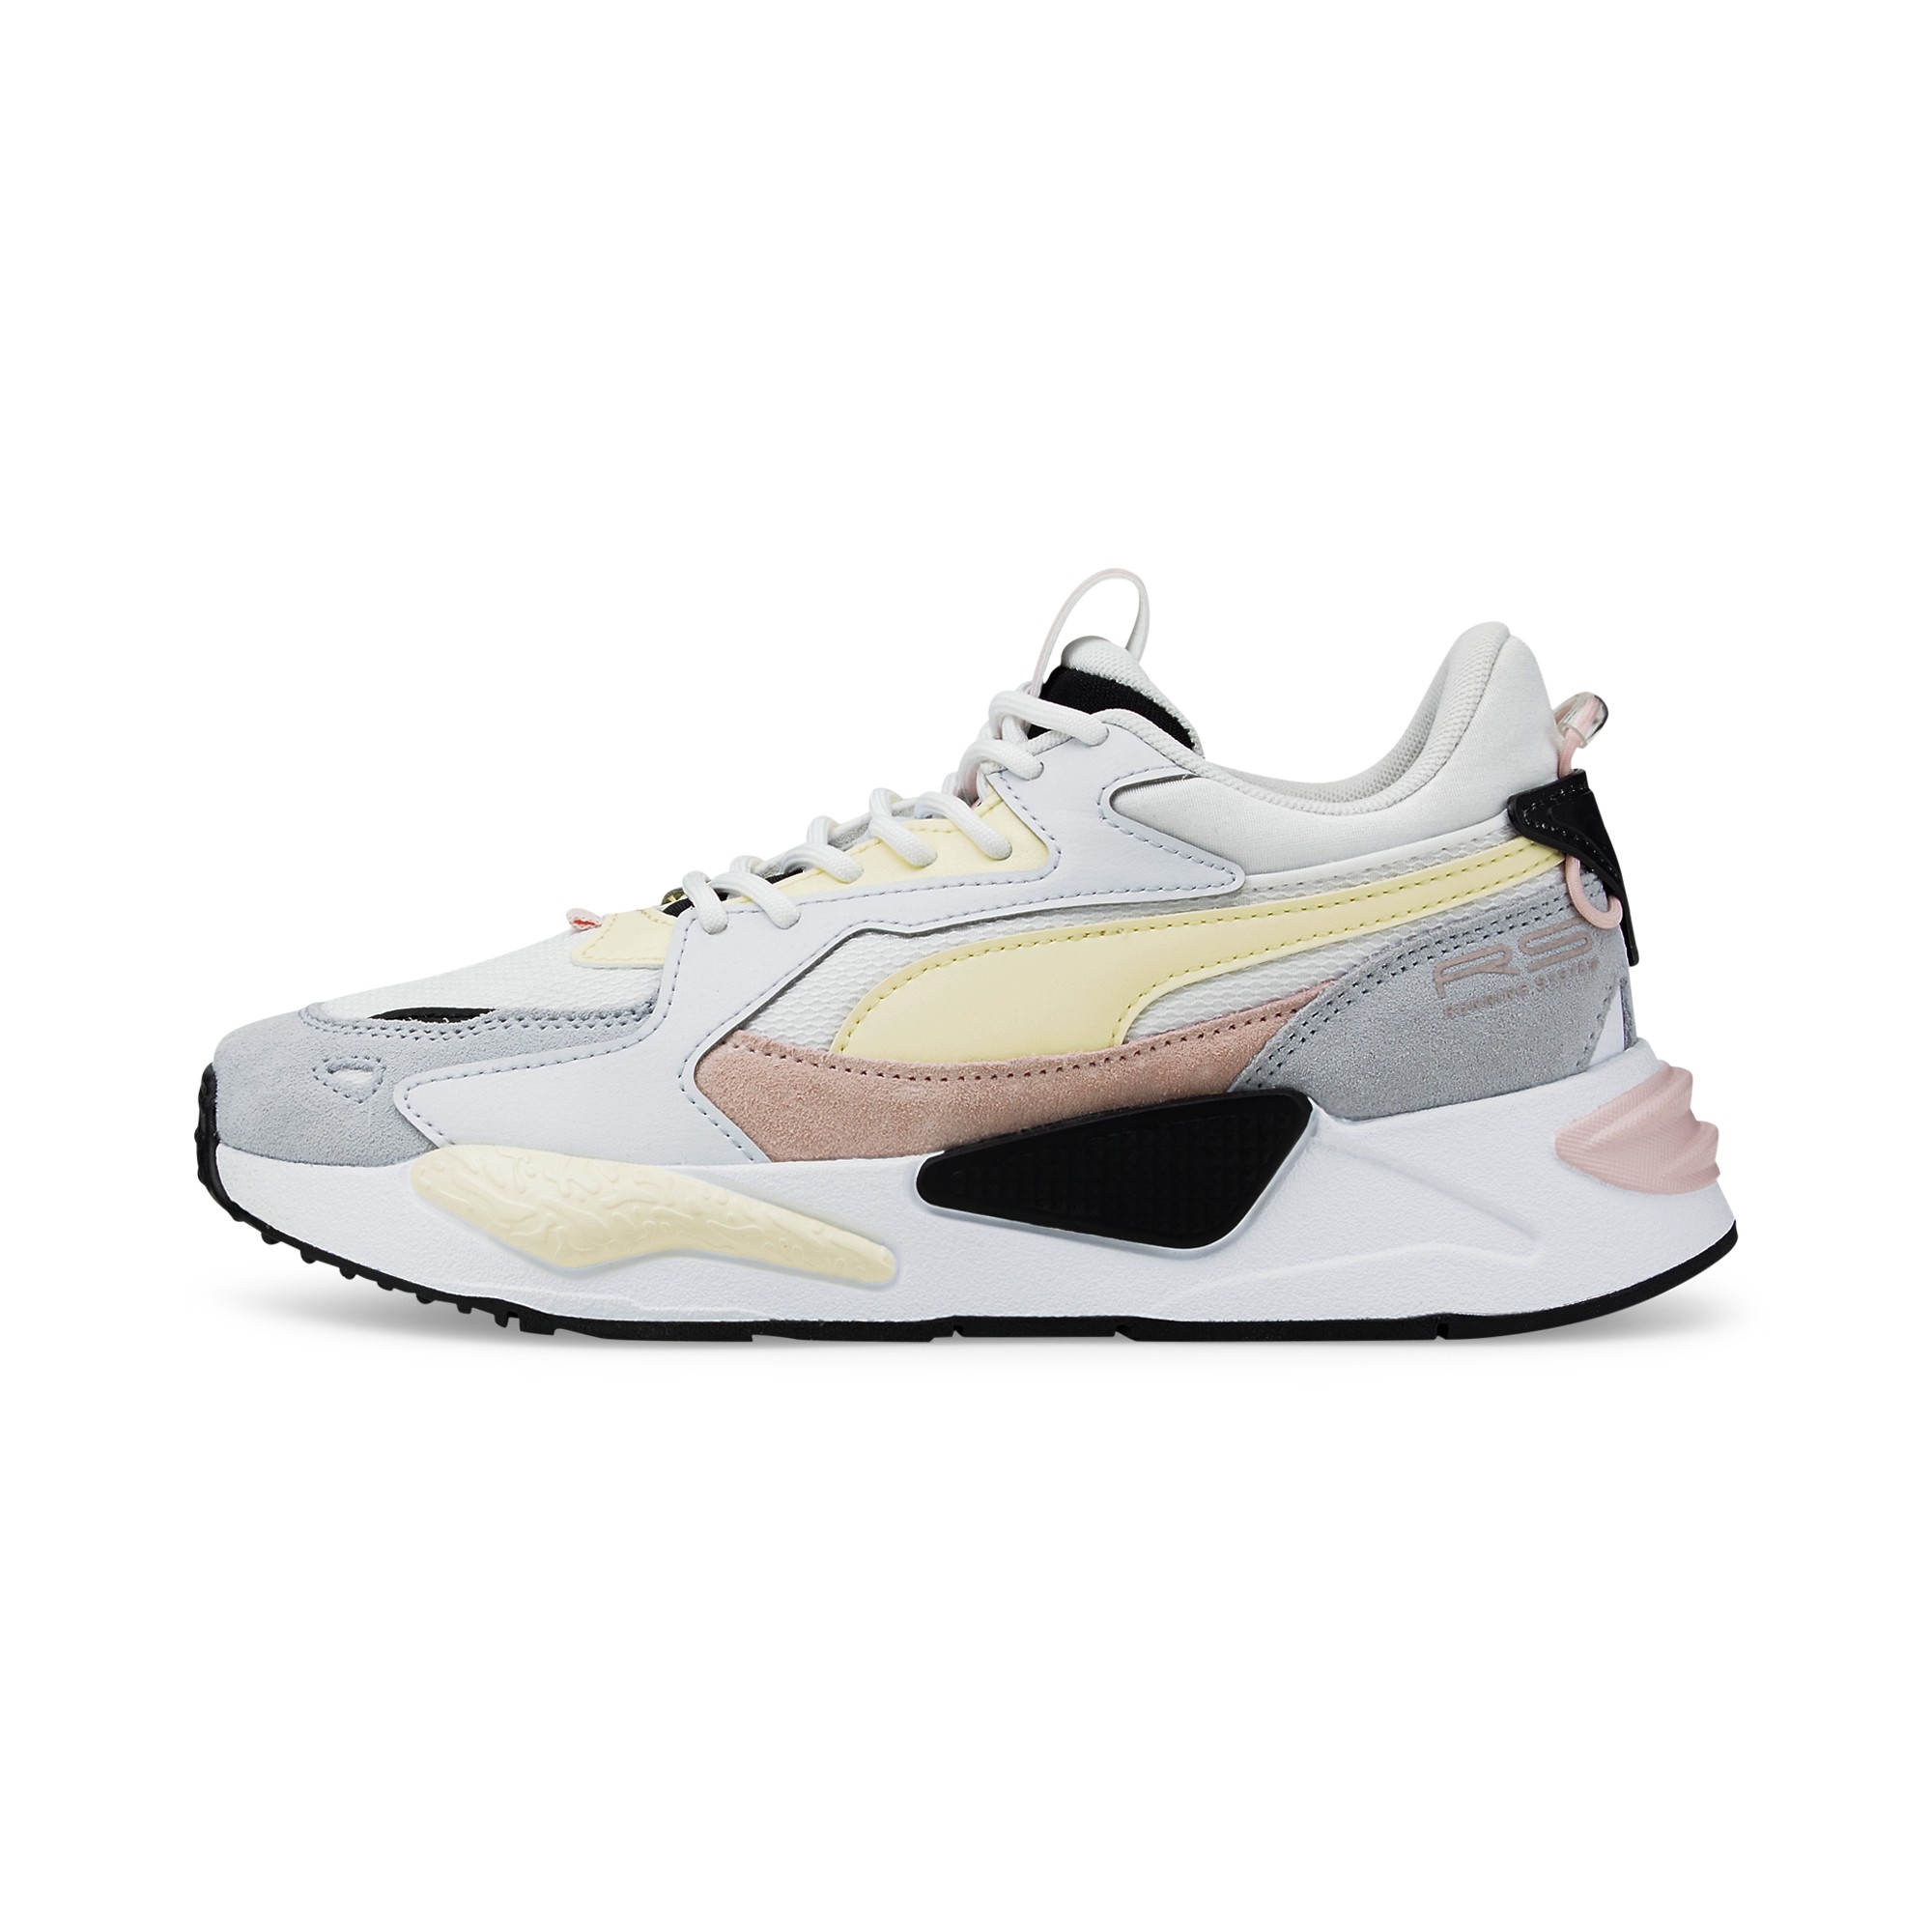 Women's sneakers online at YellowShop – Yellowshop